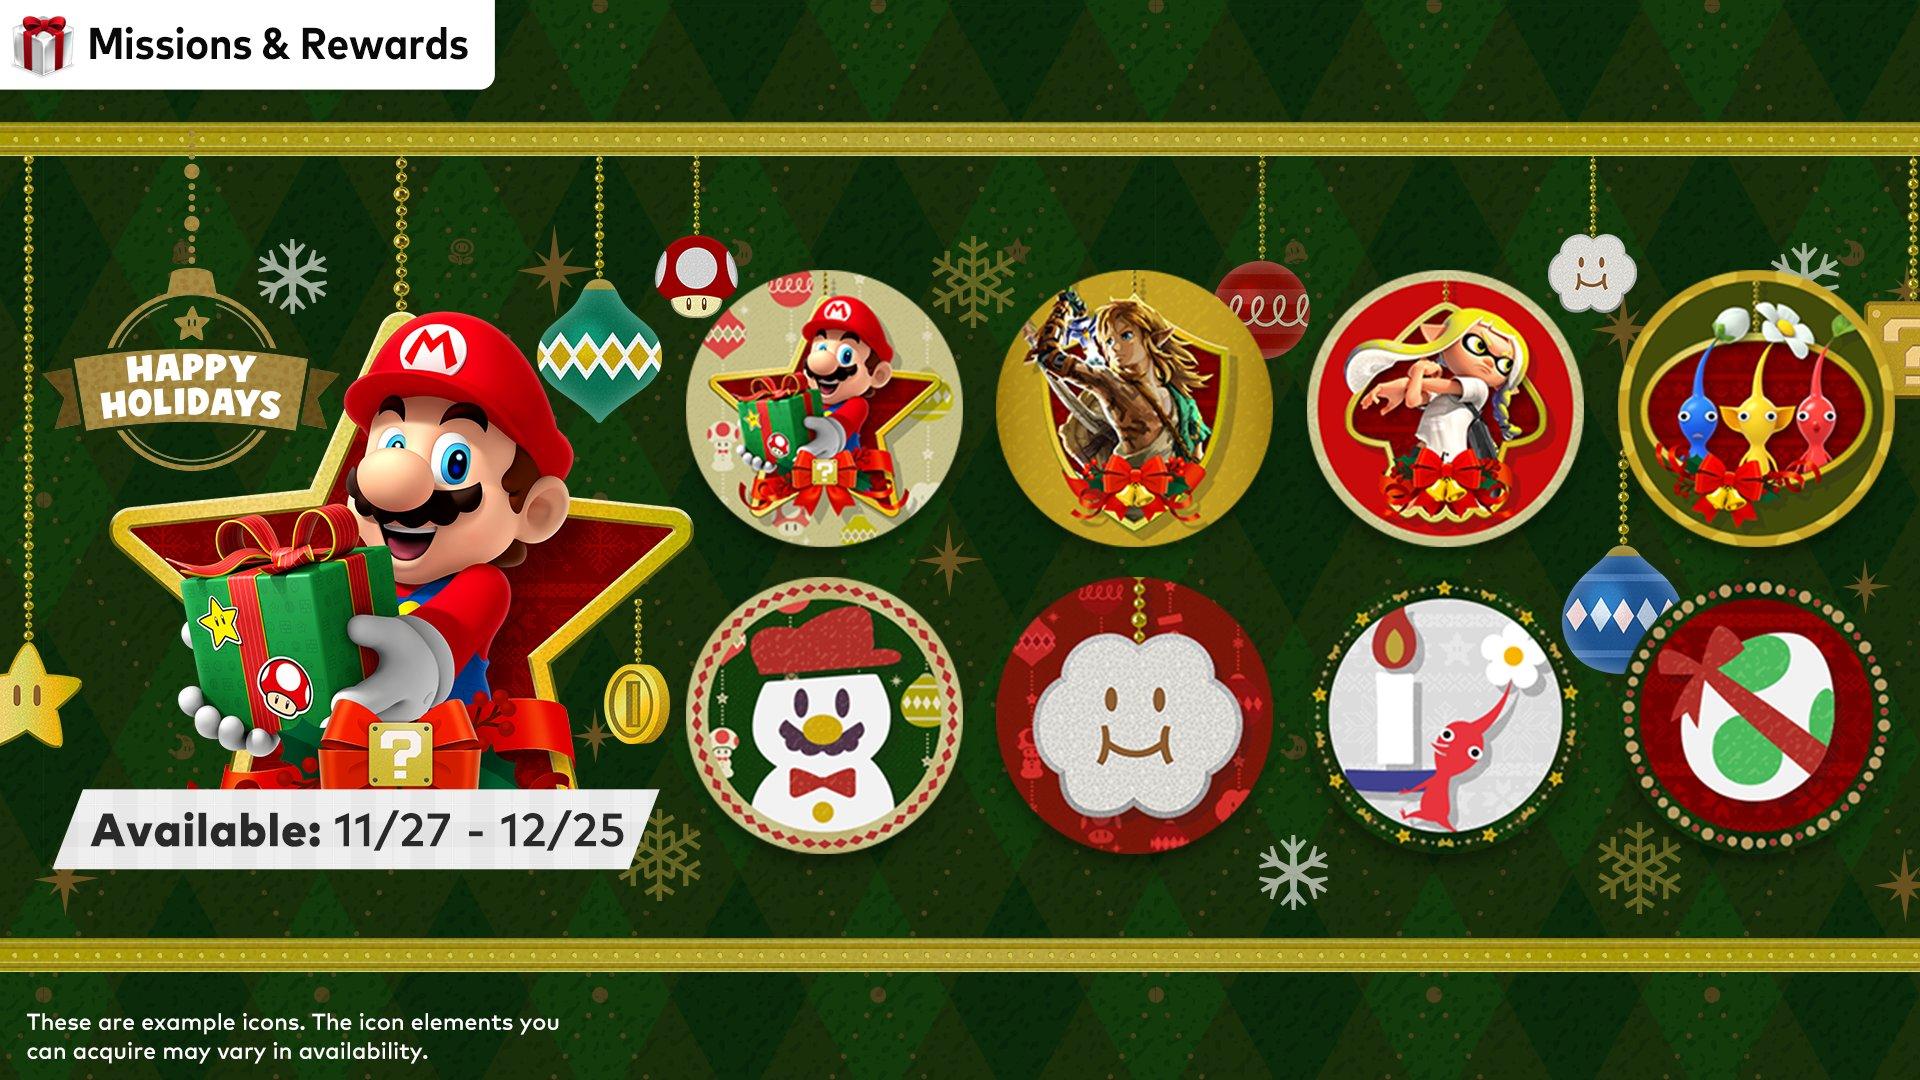 nintendo-switch-online-holiday-icons.jpg